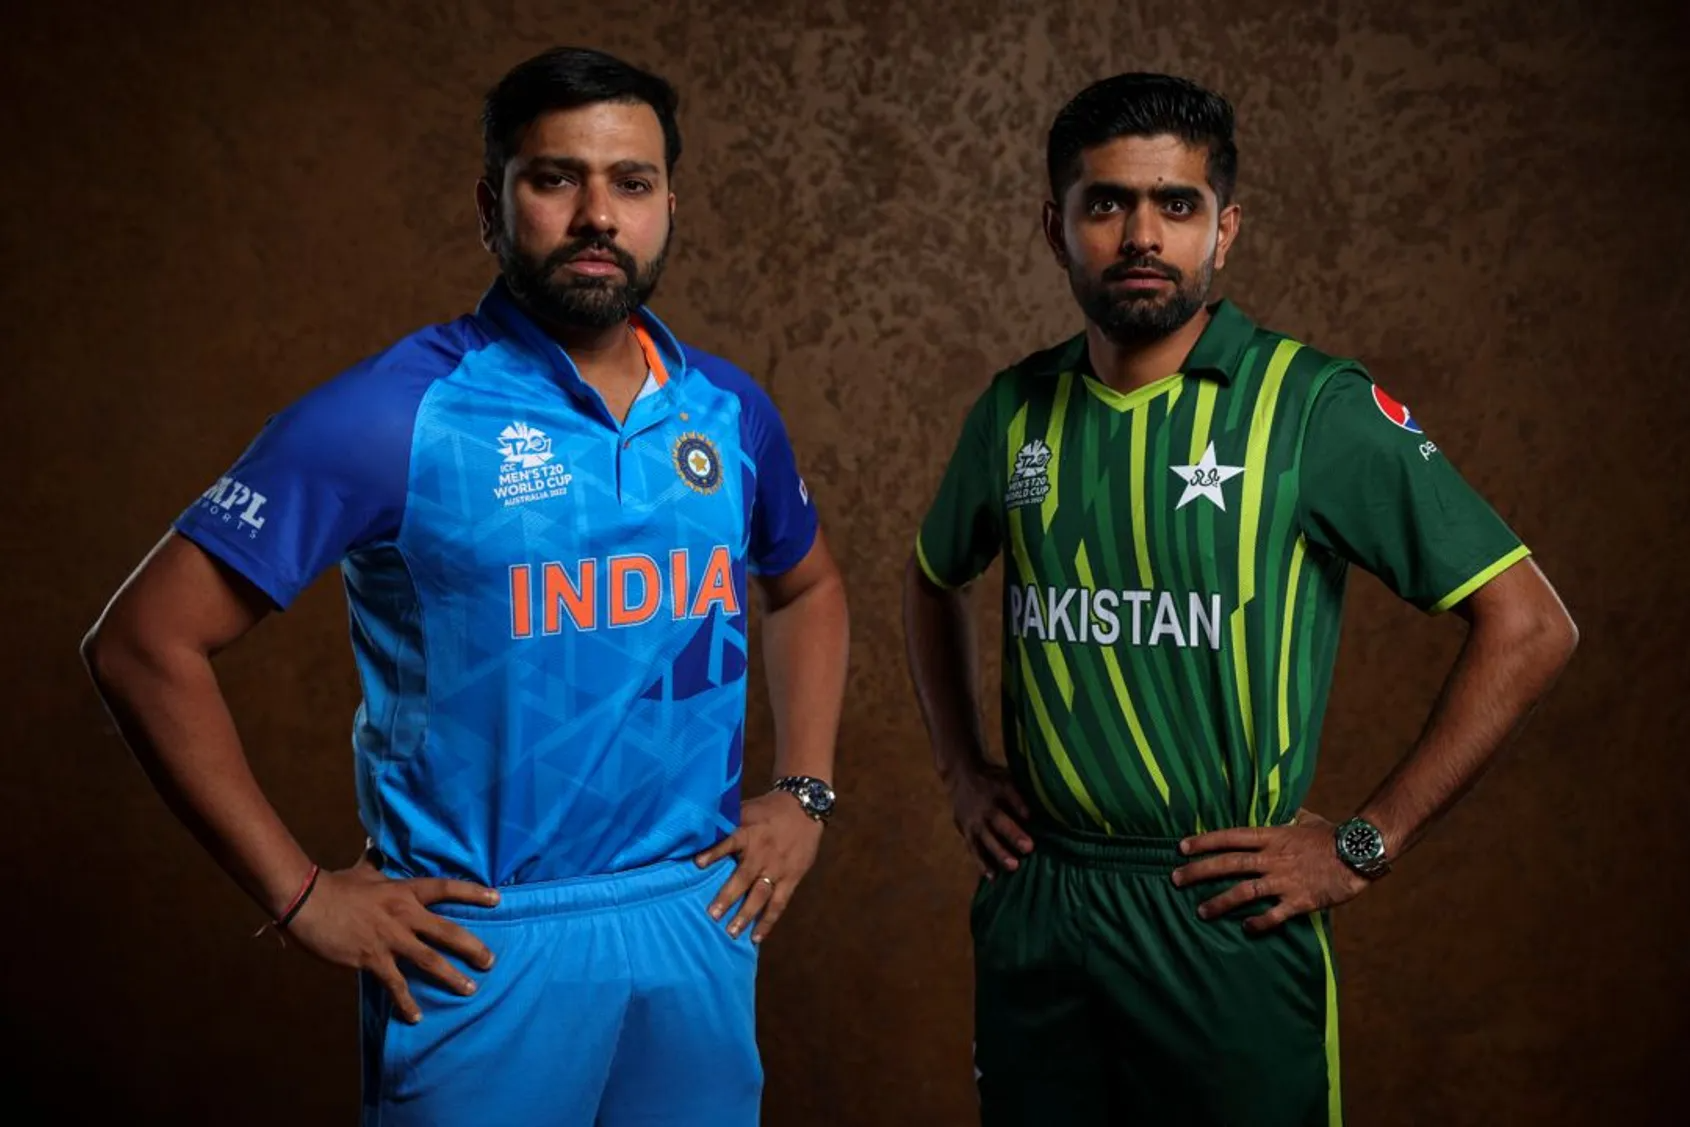 ICC: Group 2 of ICC Men's T20 World Cup gets underway as India face Pakistan